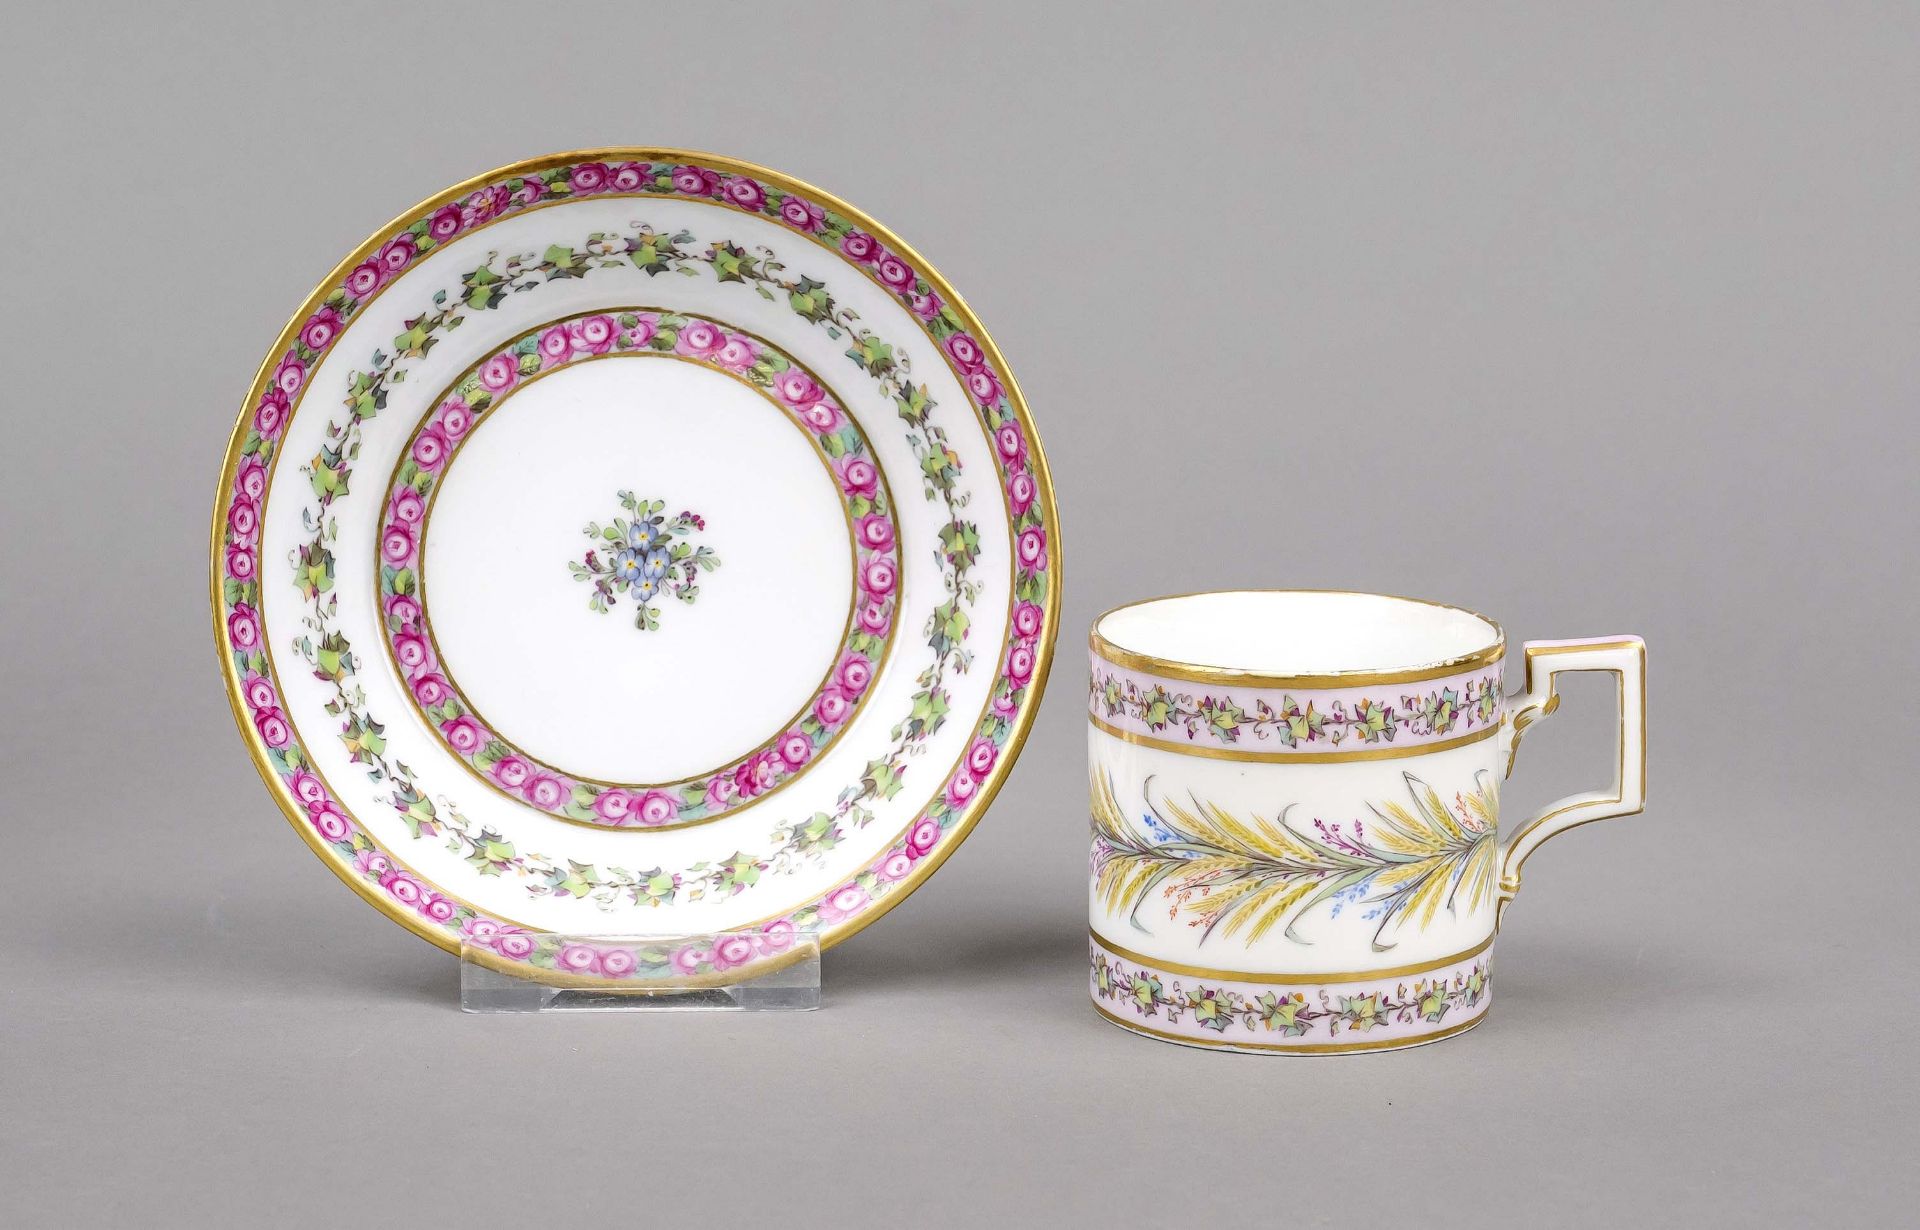 Cup and saucer, KPM Berlin, 1st half 19th century, 1x with painter's mark, Marriage, cylindrical